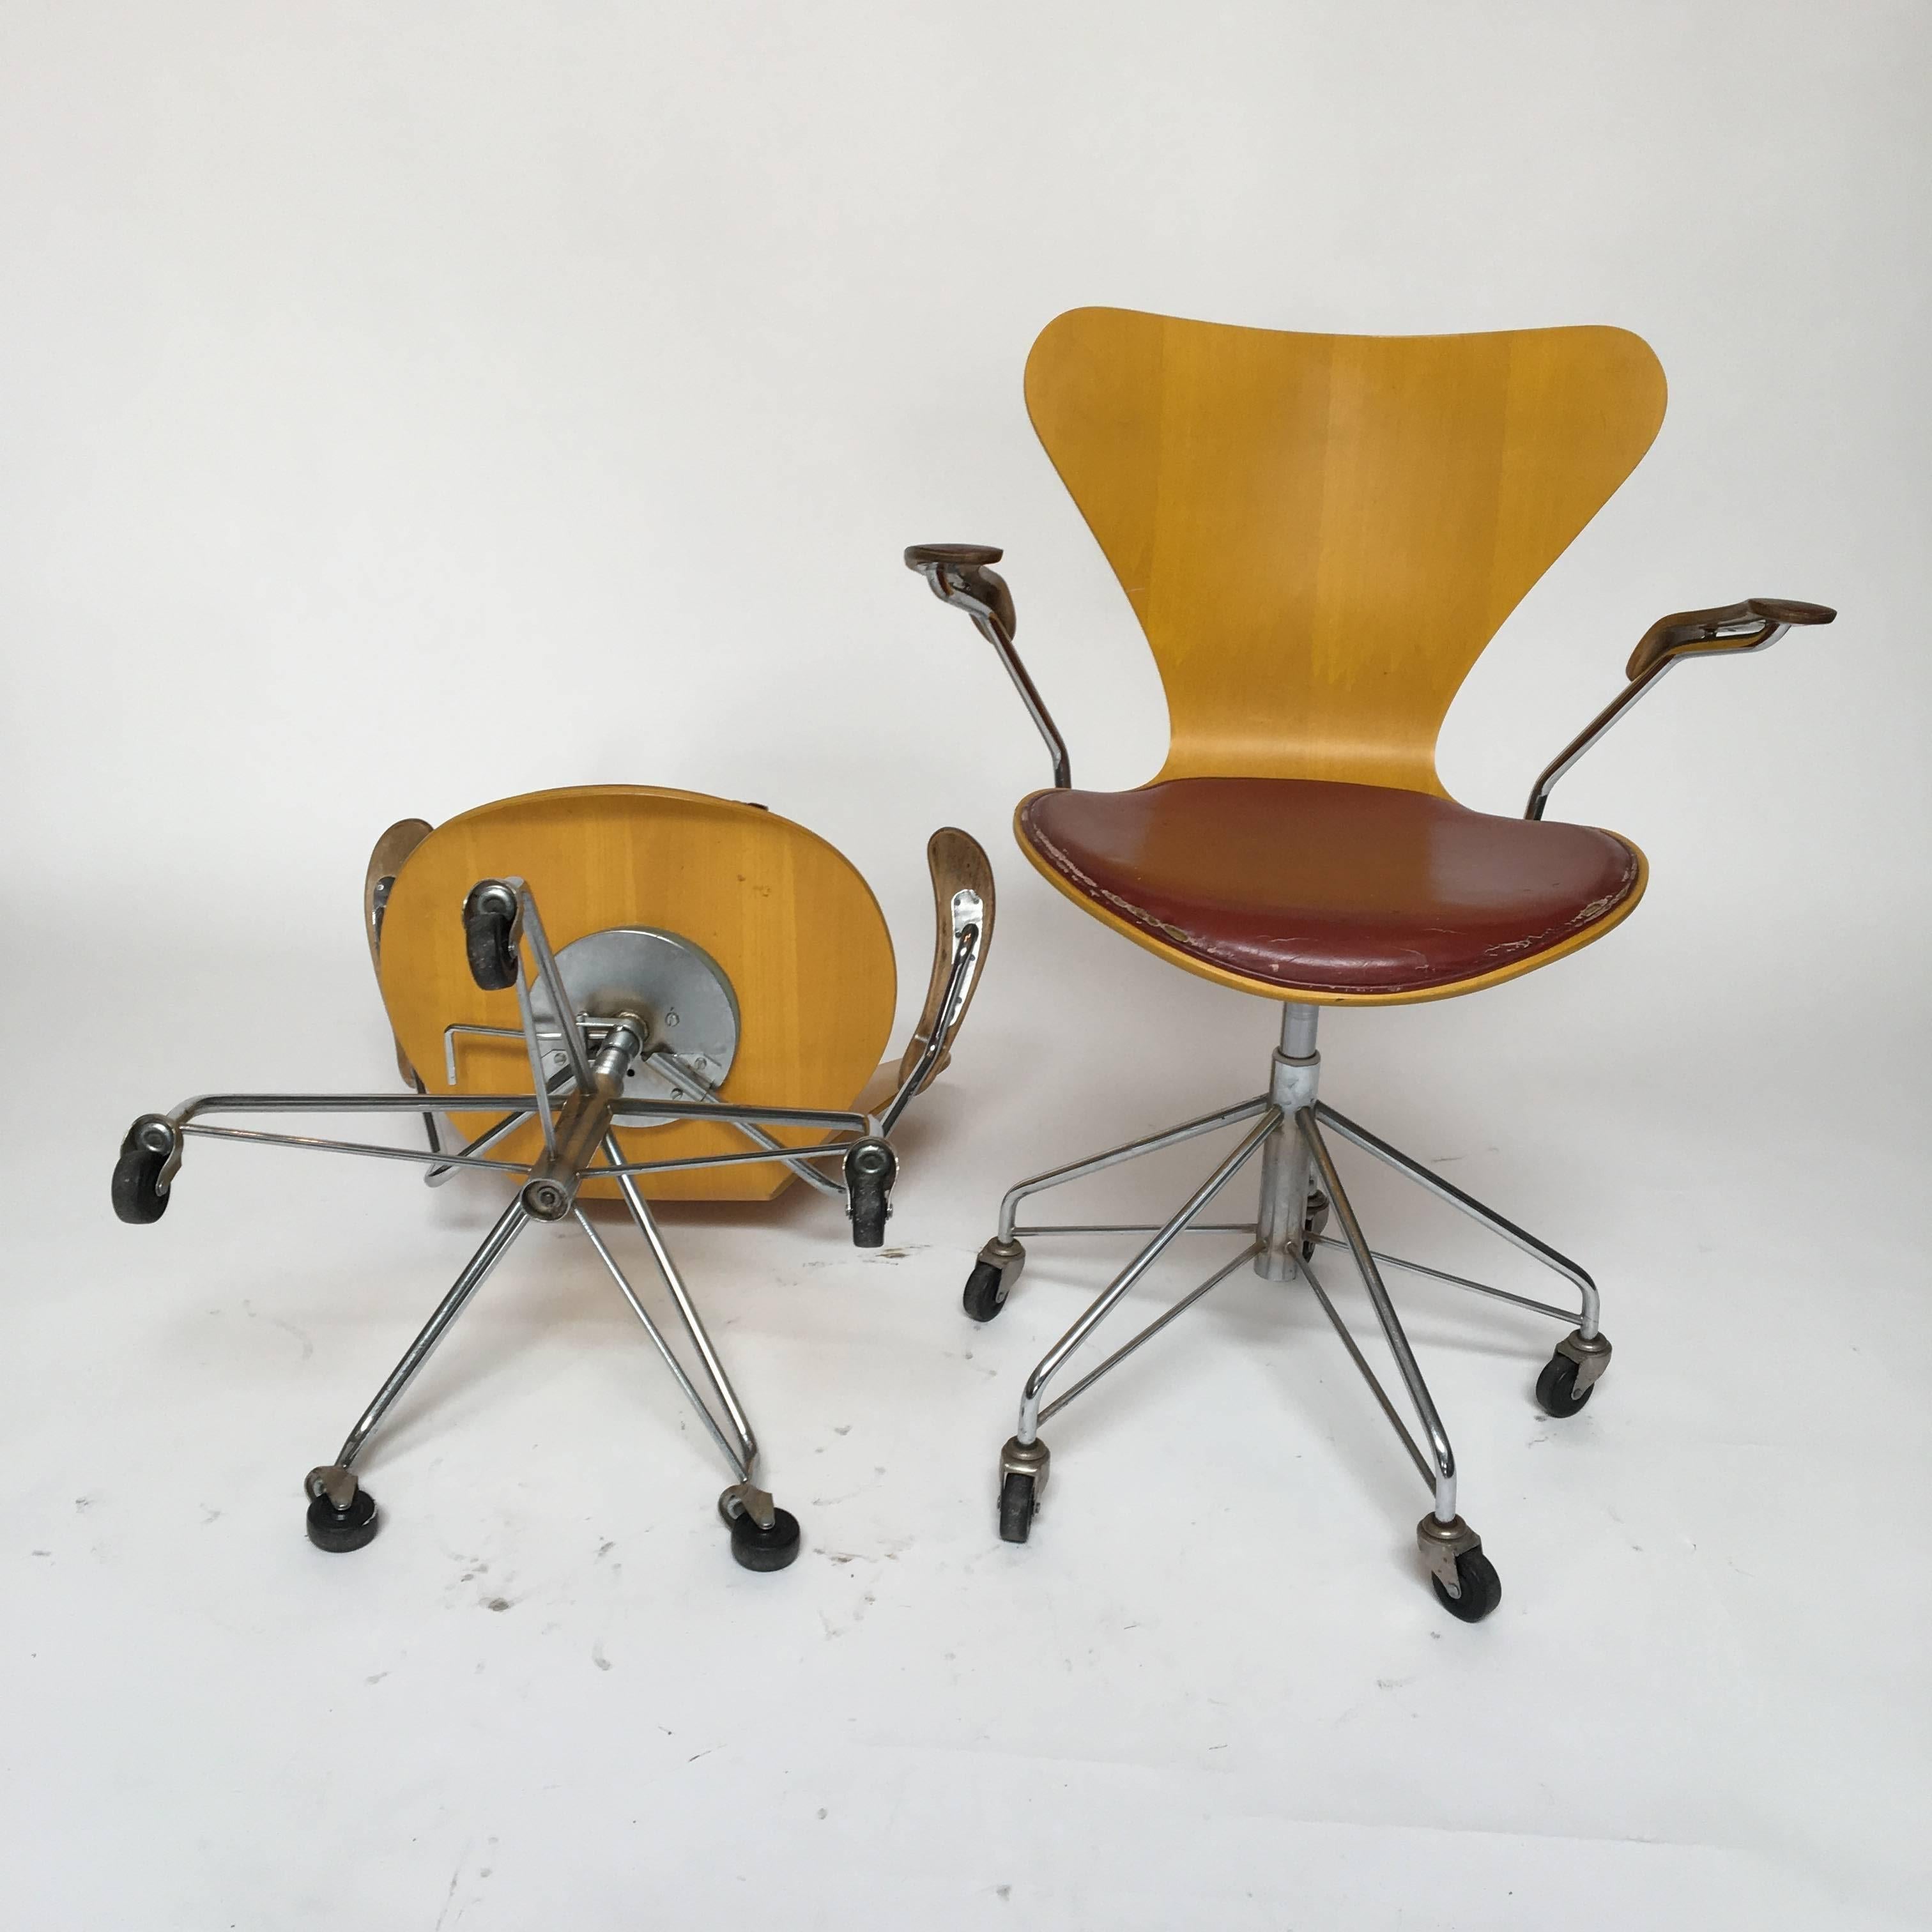 Beautiful office chairs model 3117 designed by Arne Jacobsen for Fritz Hansen
all the hydraulics work
they are both in great vintage condition
the only issue is the leather on the seats
they have a few tears
can possibly be fixed or just